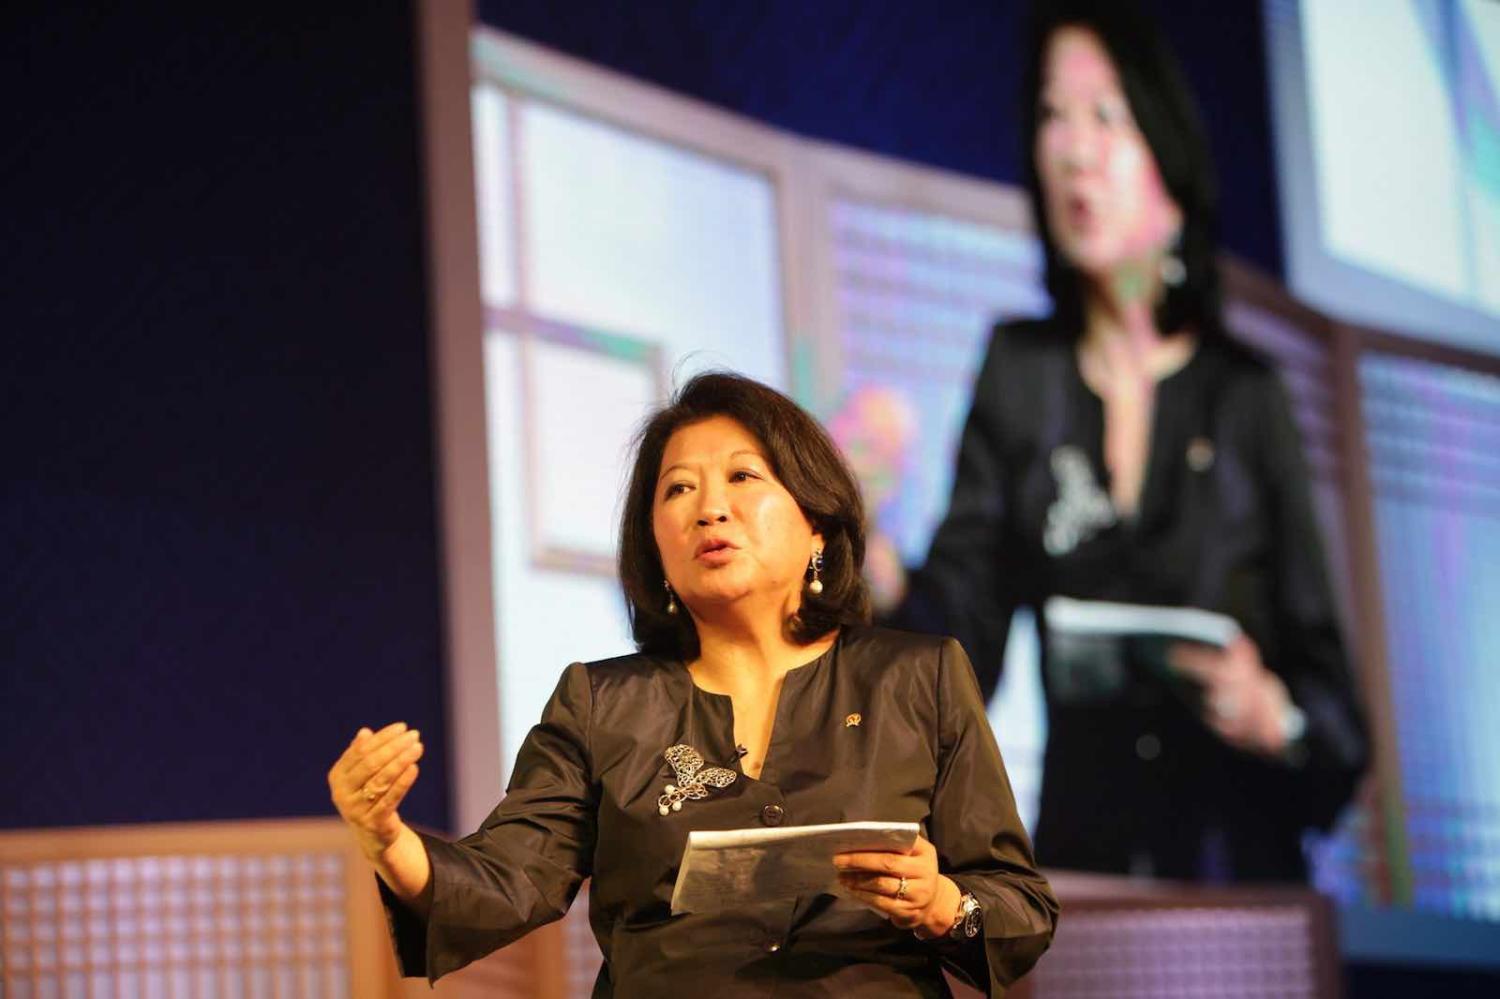 Mari Pangestu has had a remarkable career as an economic adviser and policy maker in Indonesia (Photo: World Travel & Tourism Council/Flickr)